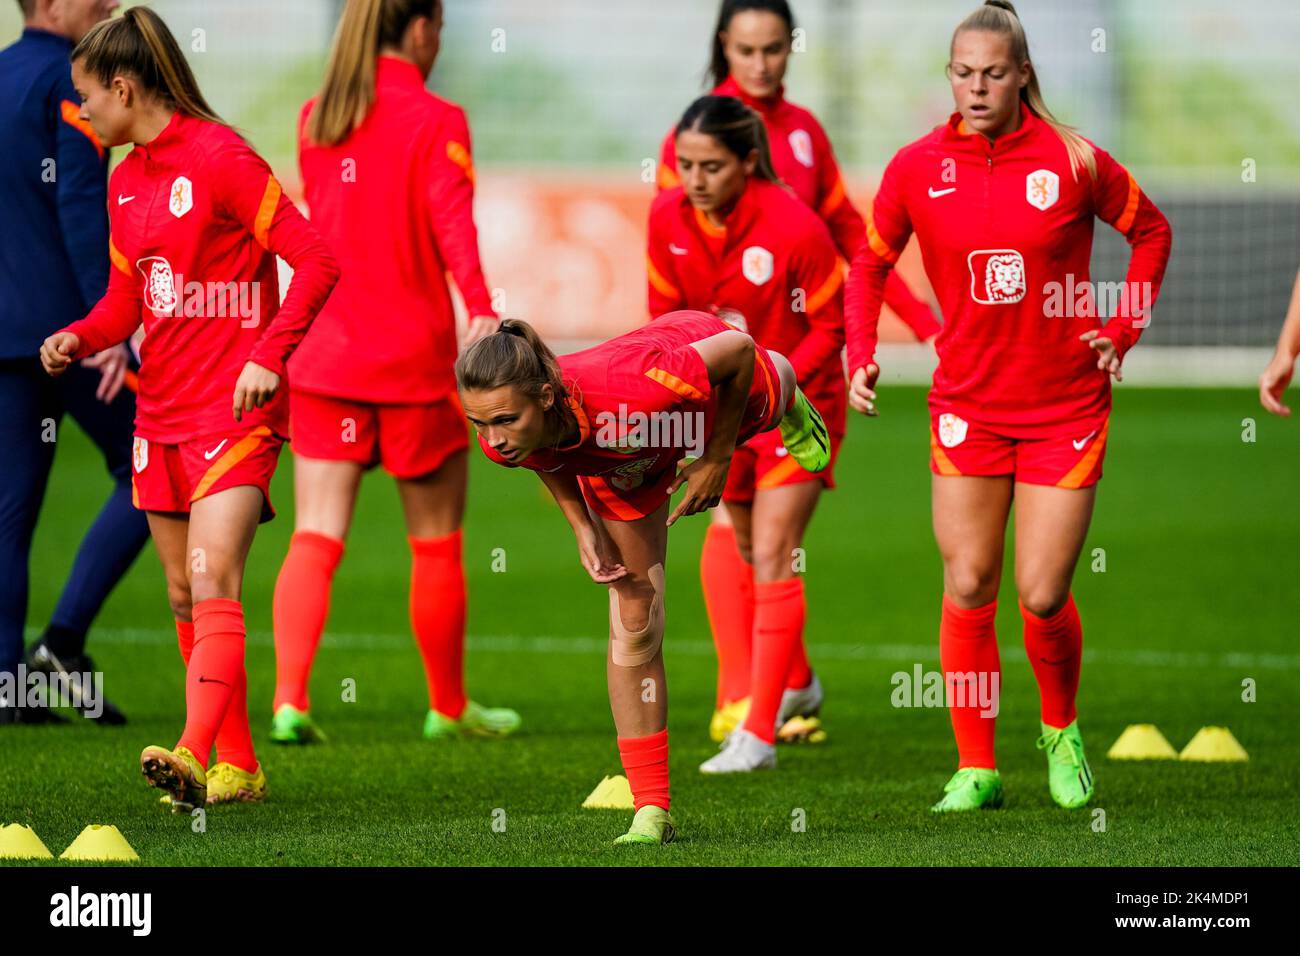 ZEIST, NETHERLANDS - OCTOBER 3: Kerstin Casparij of the Netherlands during a Training Session of the Netherlands Women’s Football Team at the KNVB Campus on October 3, 2022 in Zeist, Netherlands (Photo by Joris Verwijst/Orange Pictures) Stock Photo